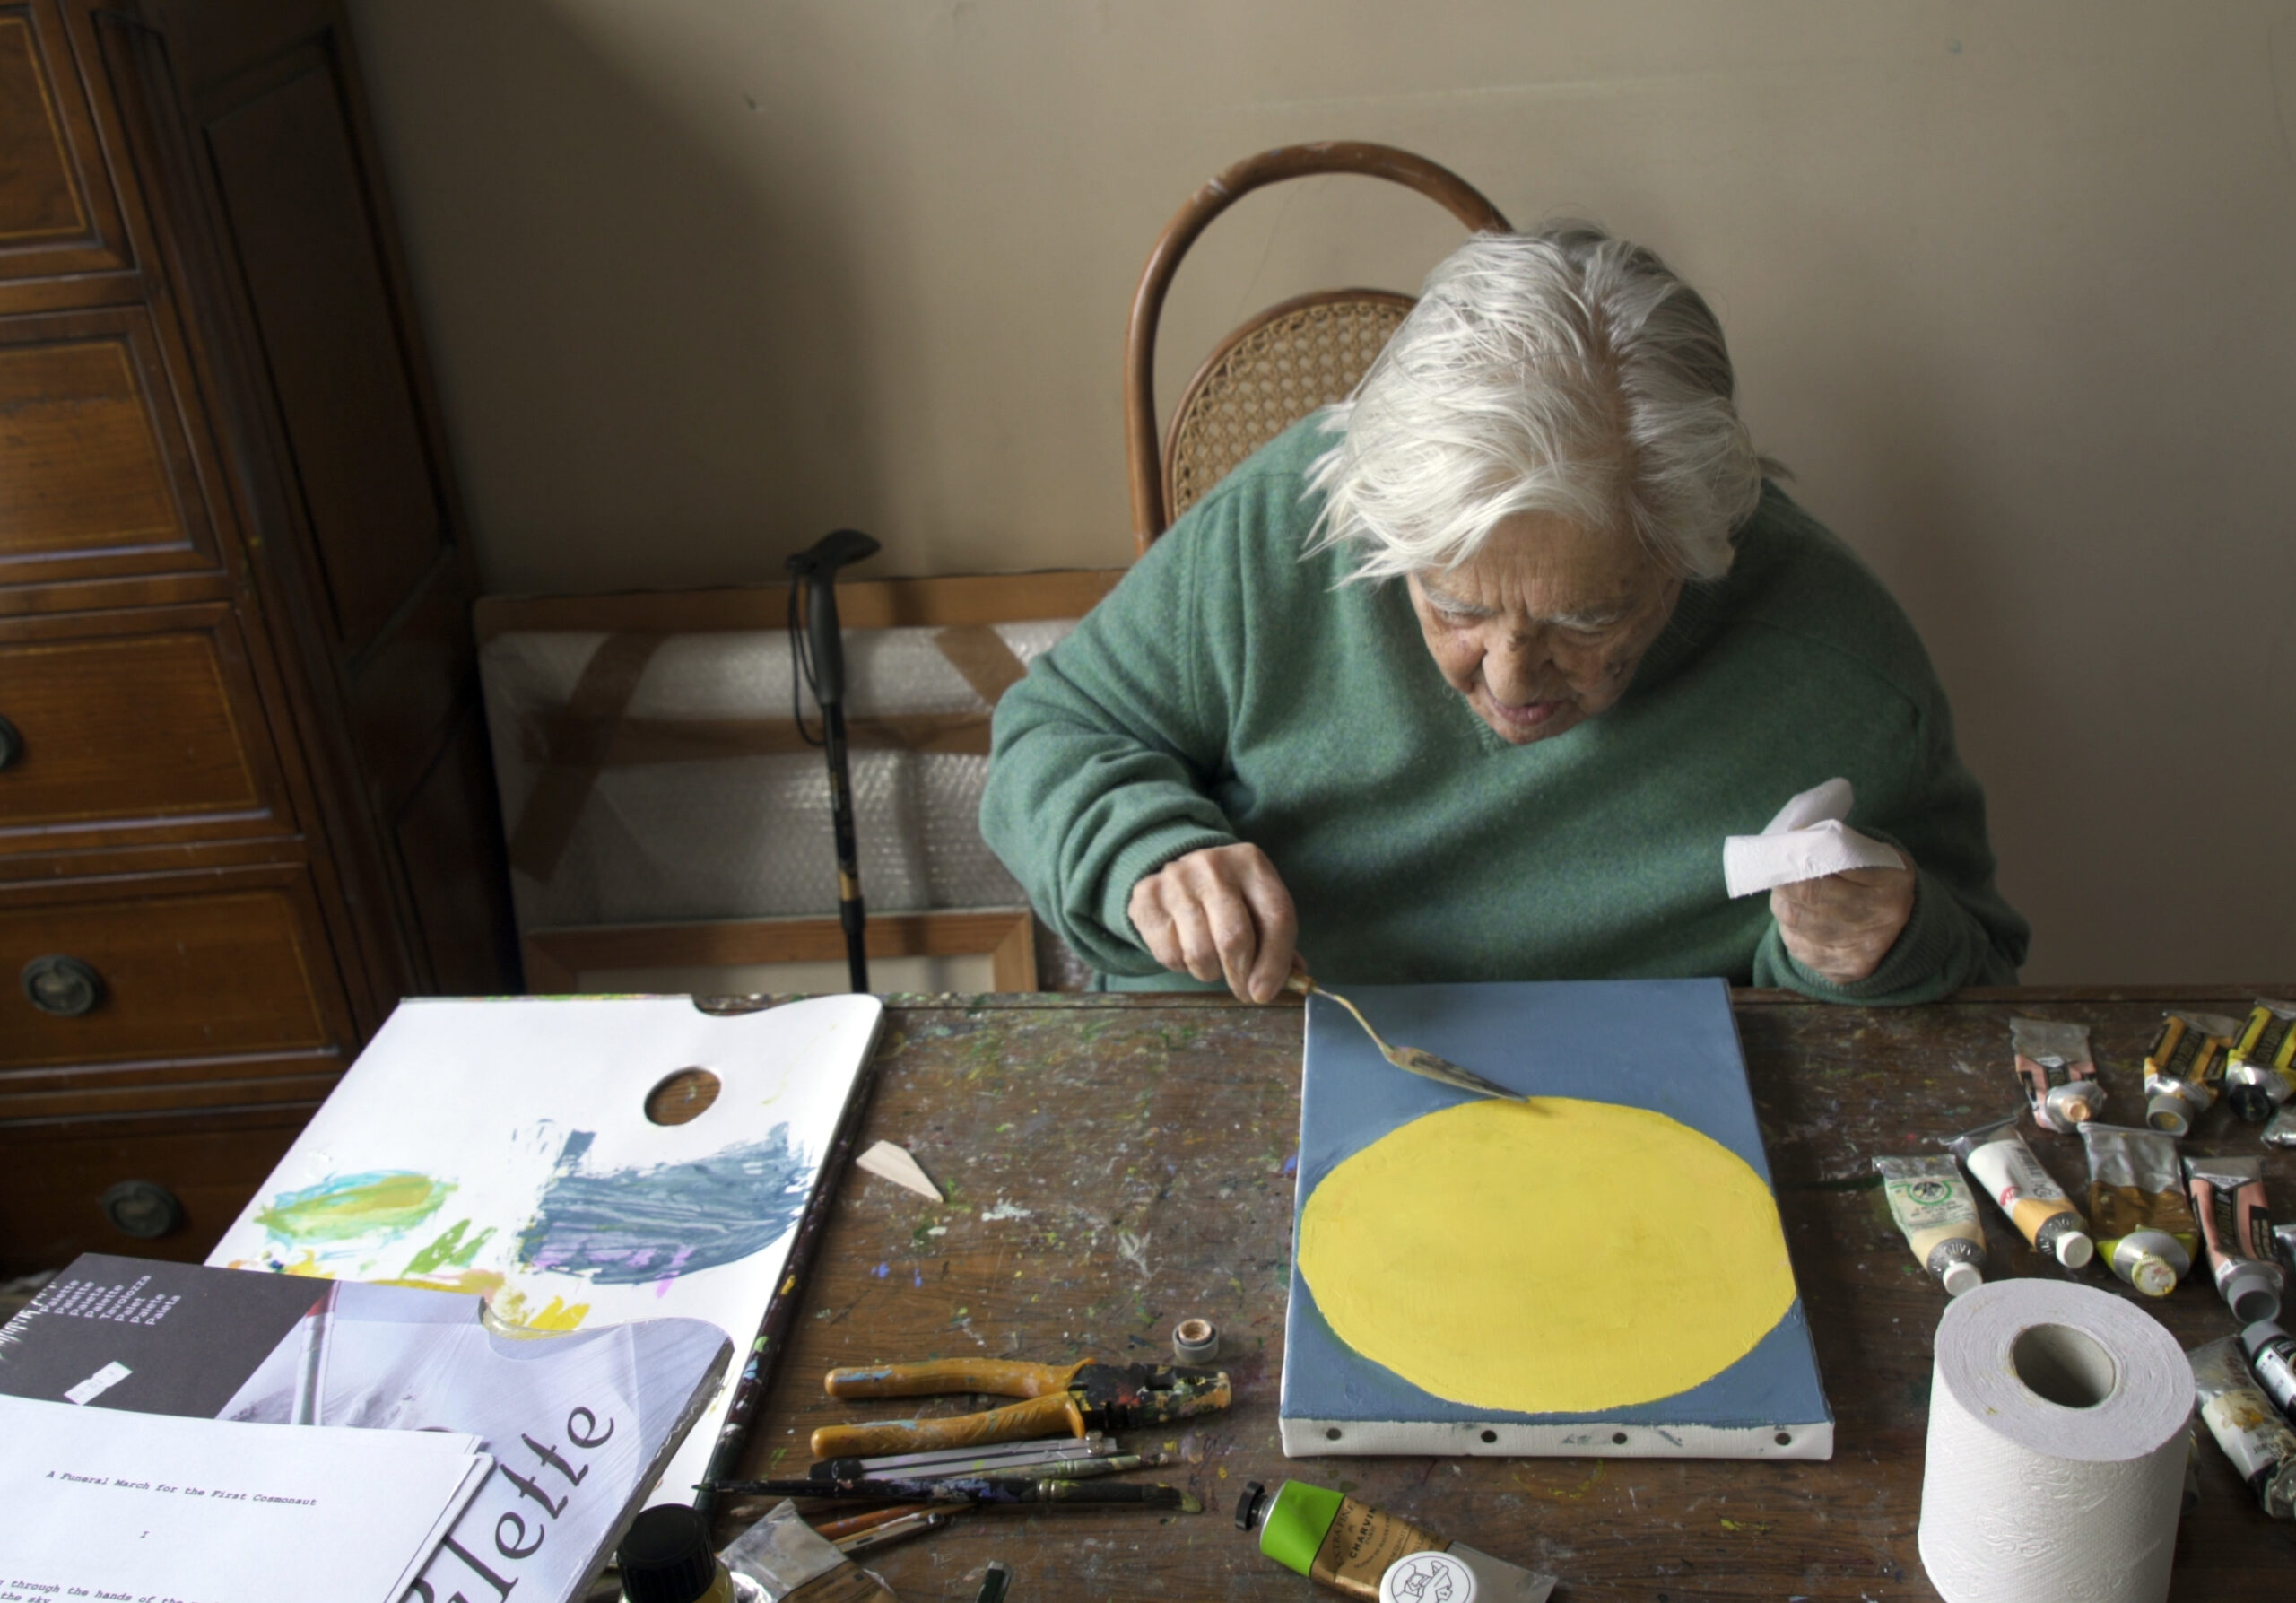 Etel Adnan sitting at table painting surrounded by painting supplies